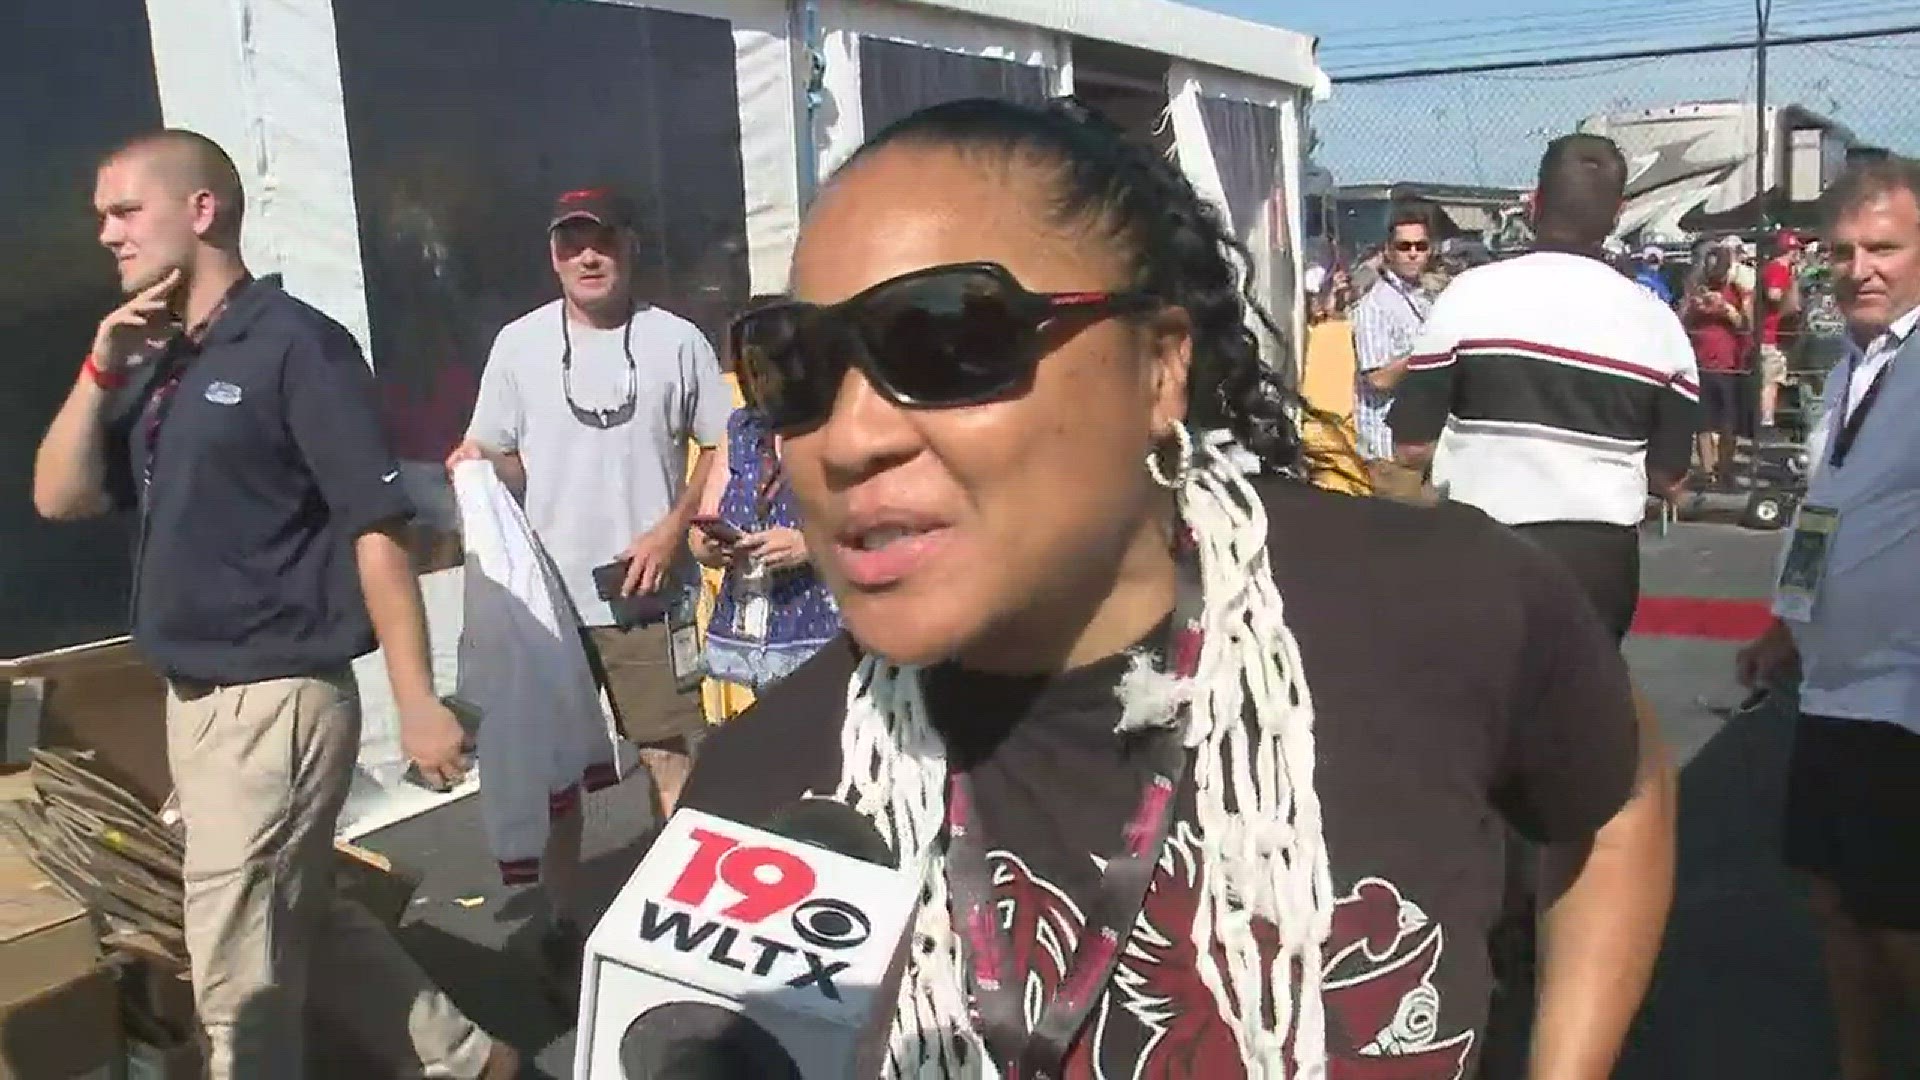 USC women's basketball coach Dawn Staley talks about her first pace laps around the Darlington Raceway, which drivers she's met and the whole experience at the Bojangles Southern 500.